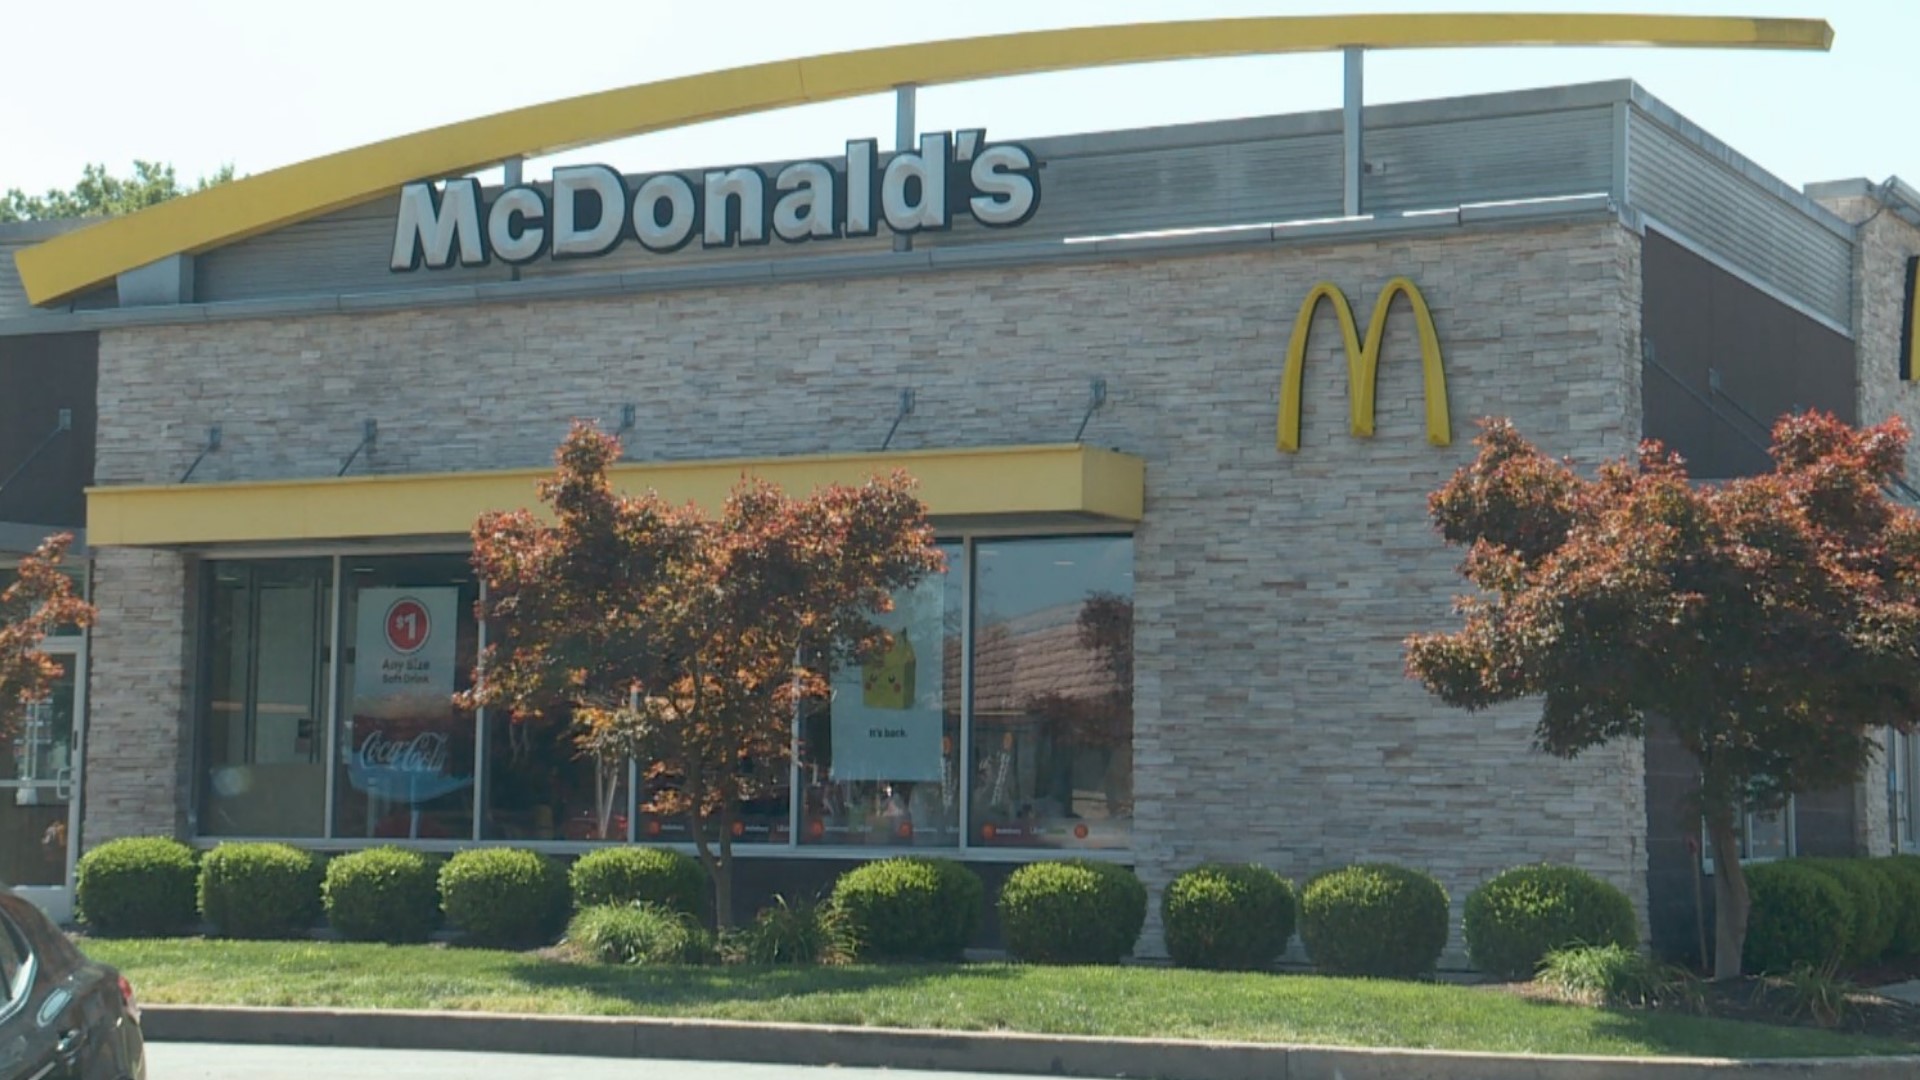 The Department of Labor looked at three different franchises that operate more than 60 McDonald's across Kentucky, Indiana, Maryland and Ohio.